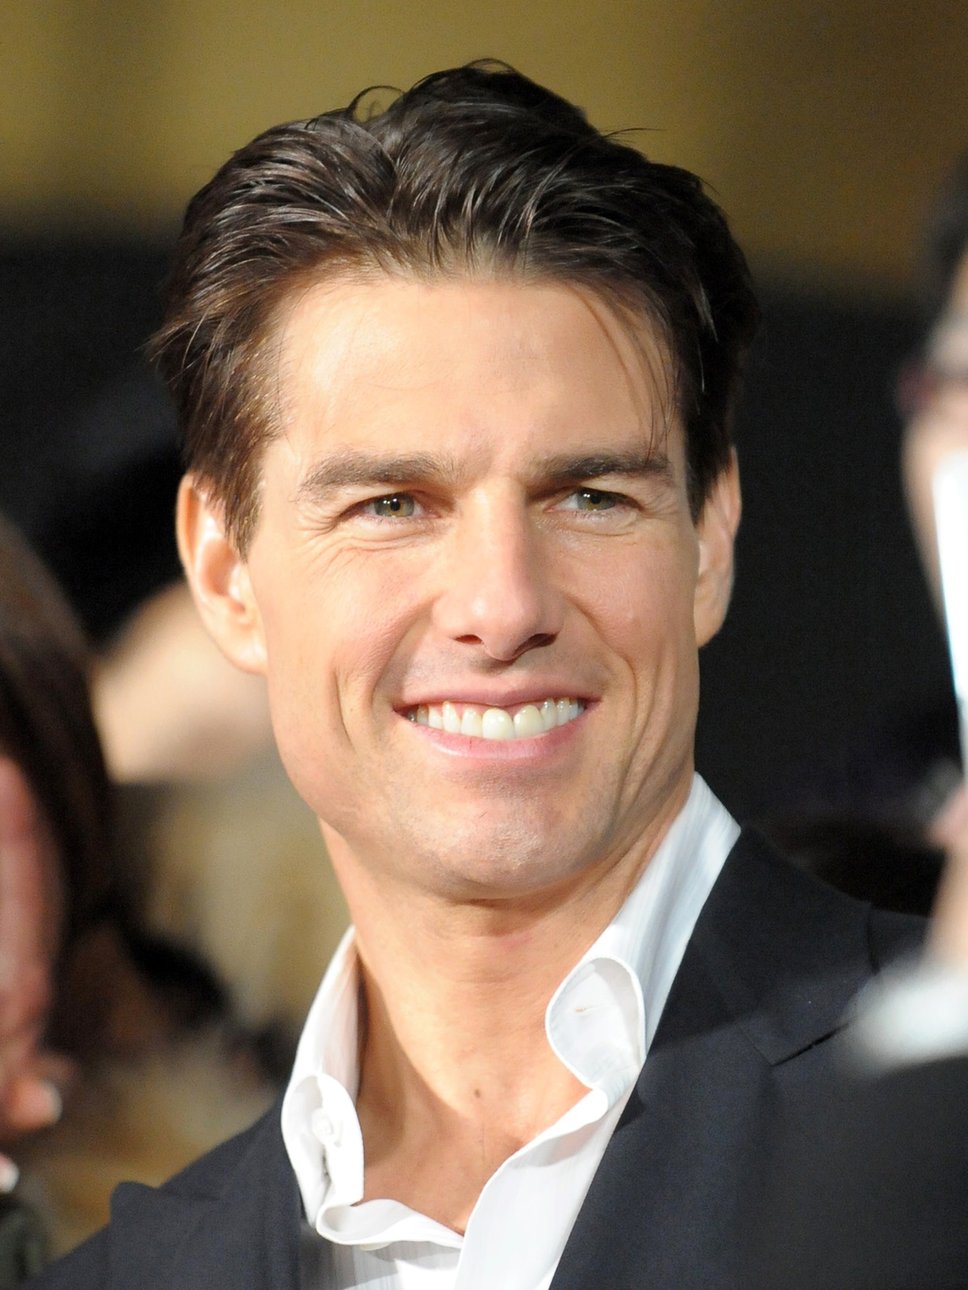 Tom Cruise Widescreen Hd Wallpapers